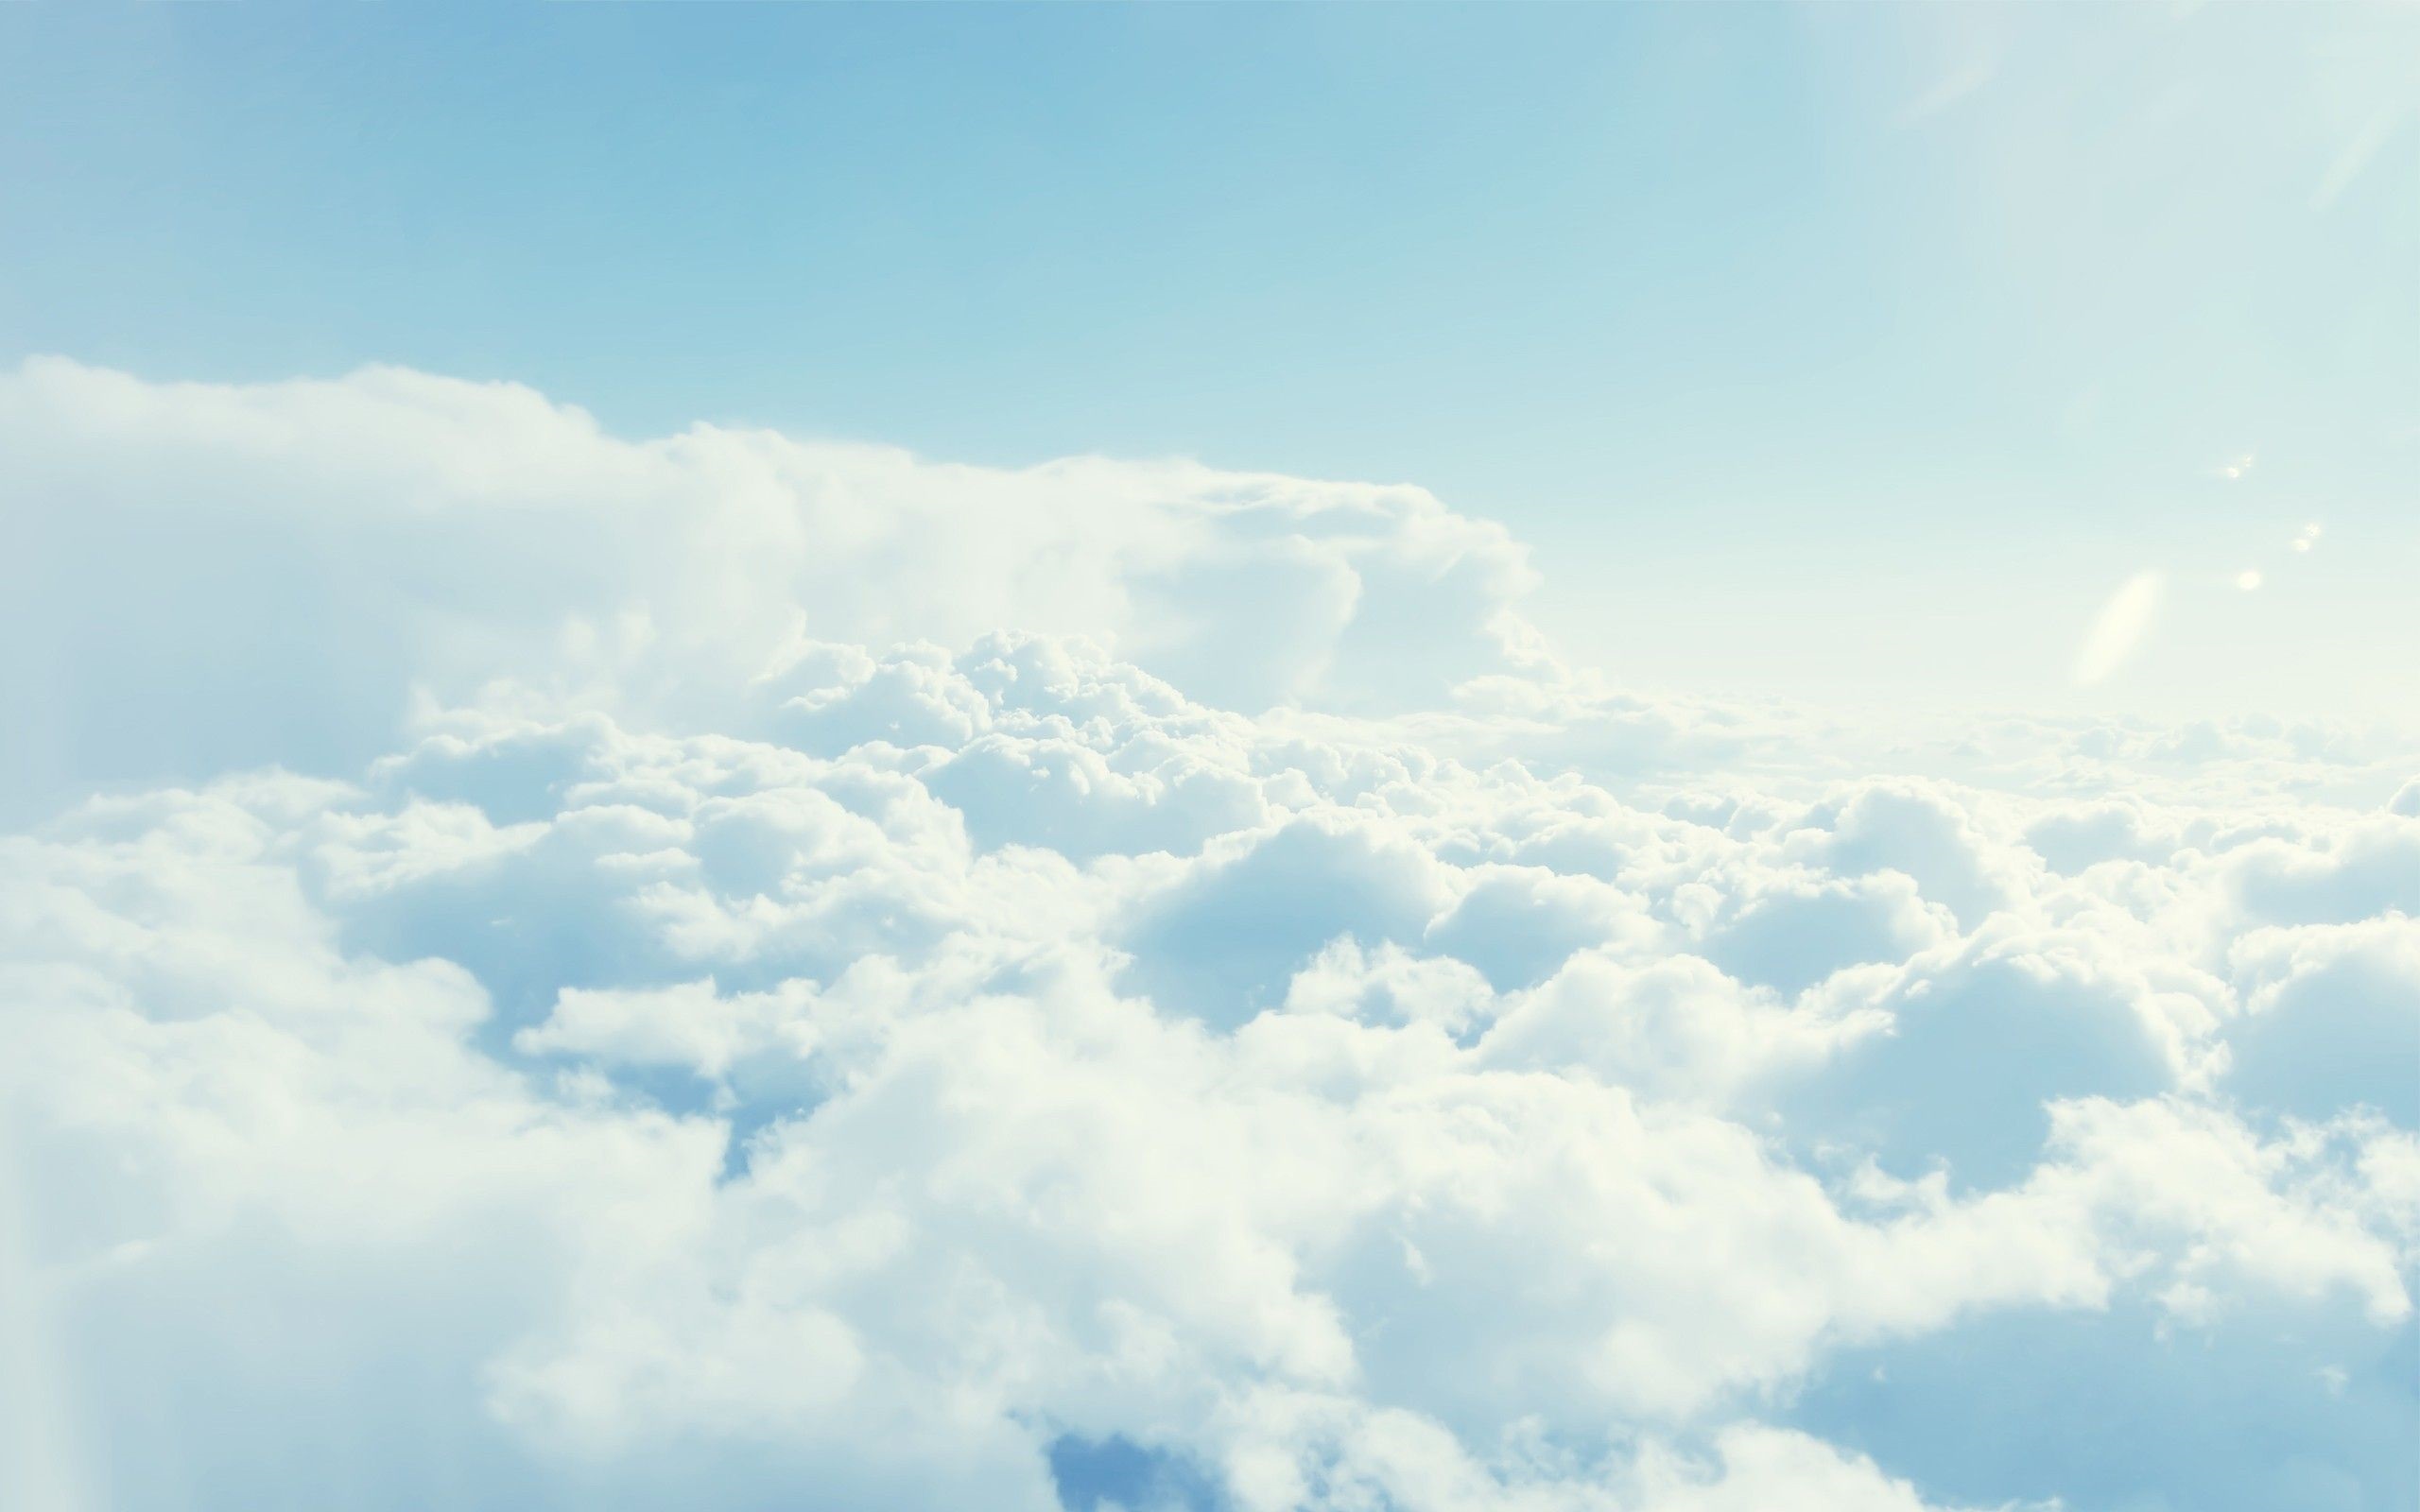 Cloud Wallpapers 4K PC Background [Brings Relaxation To The Mind]